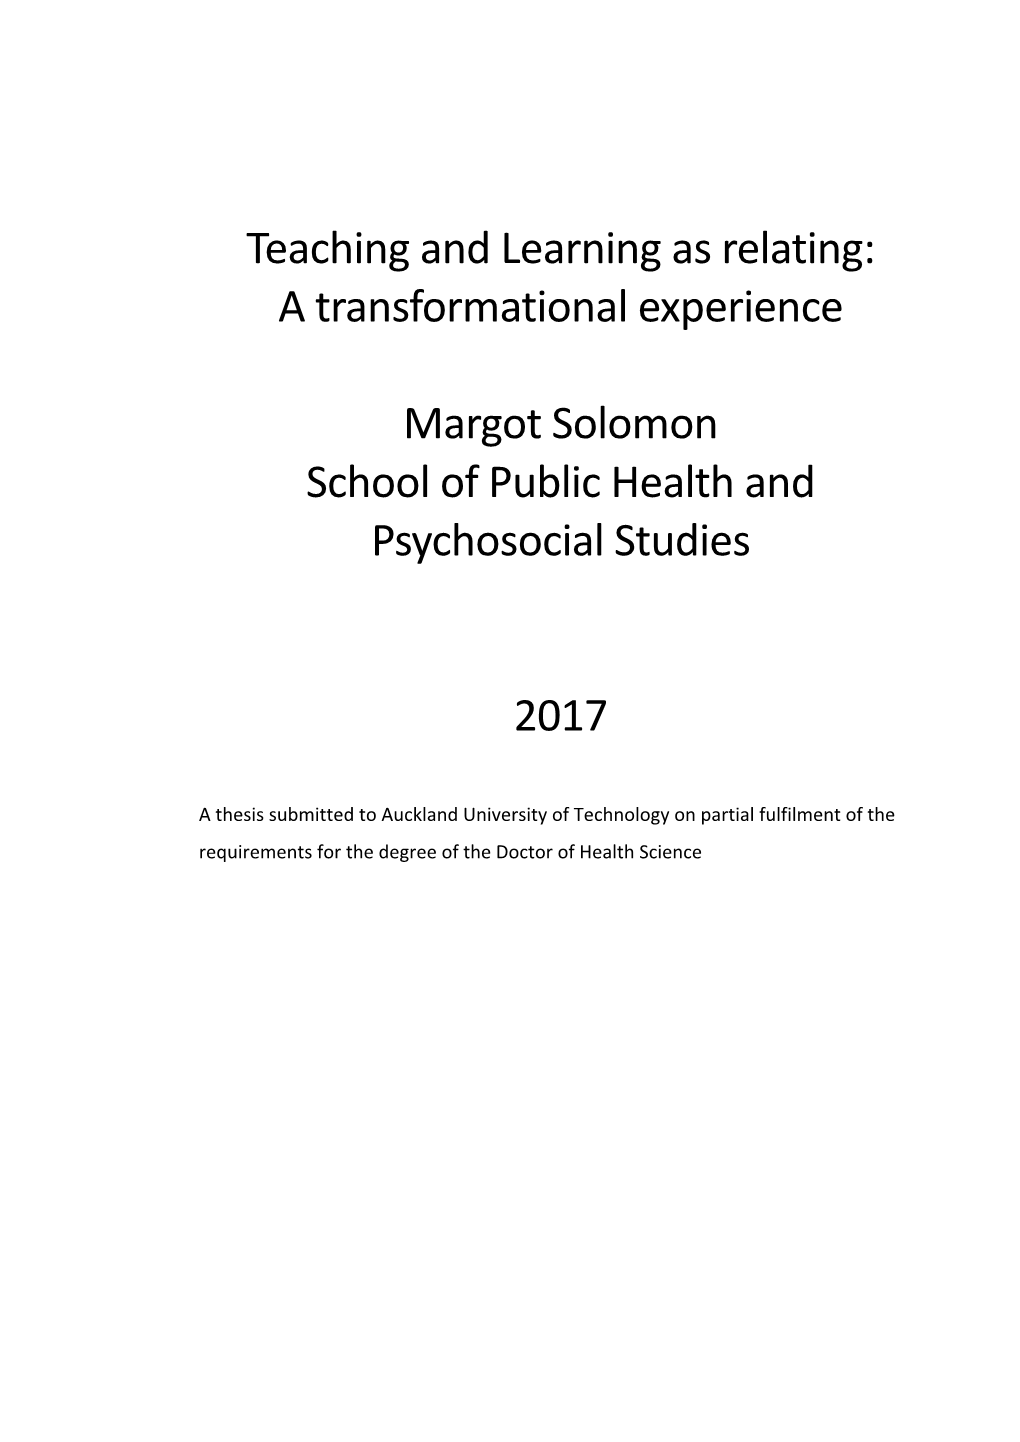 Teaching and Learning As Relating Margotsolomon